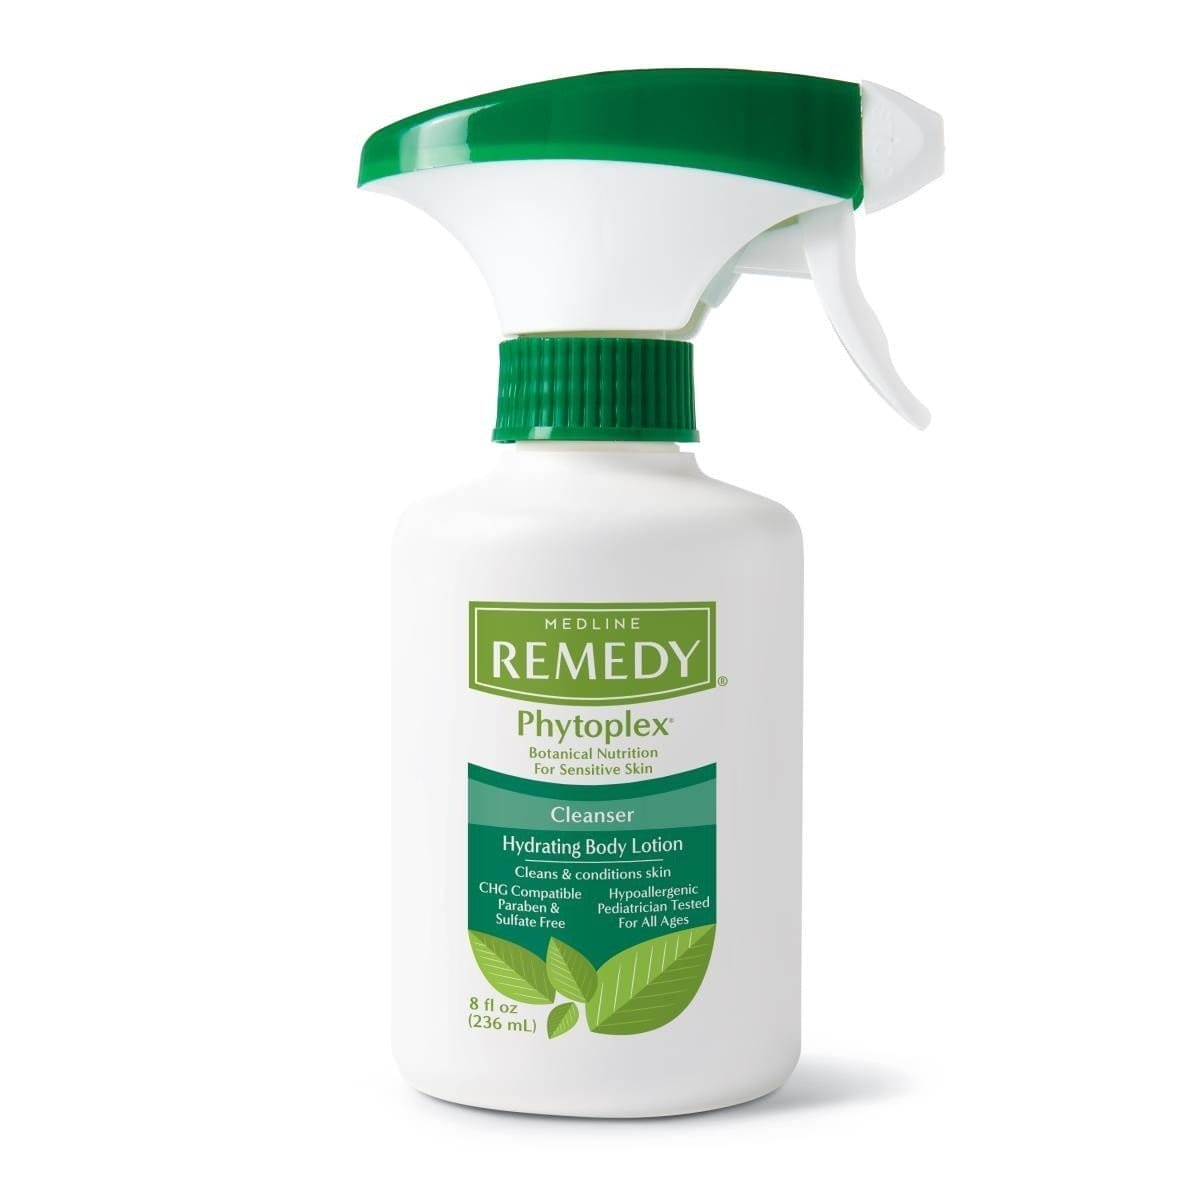 Image of Medline Remedy Phytoplex Cleansing Body Lotion